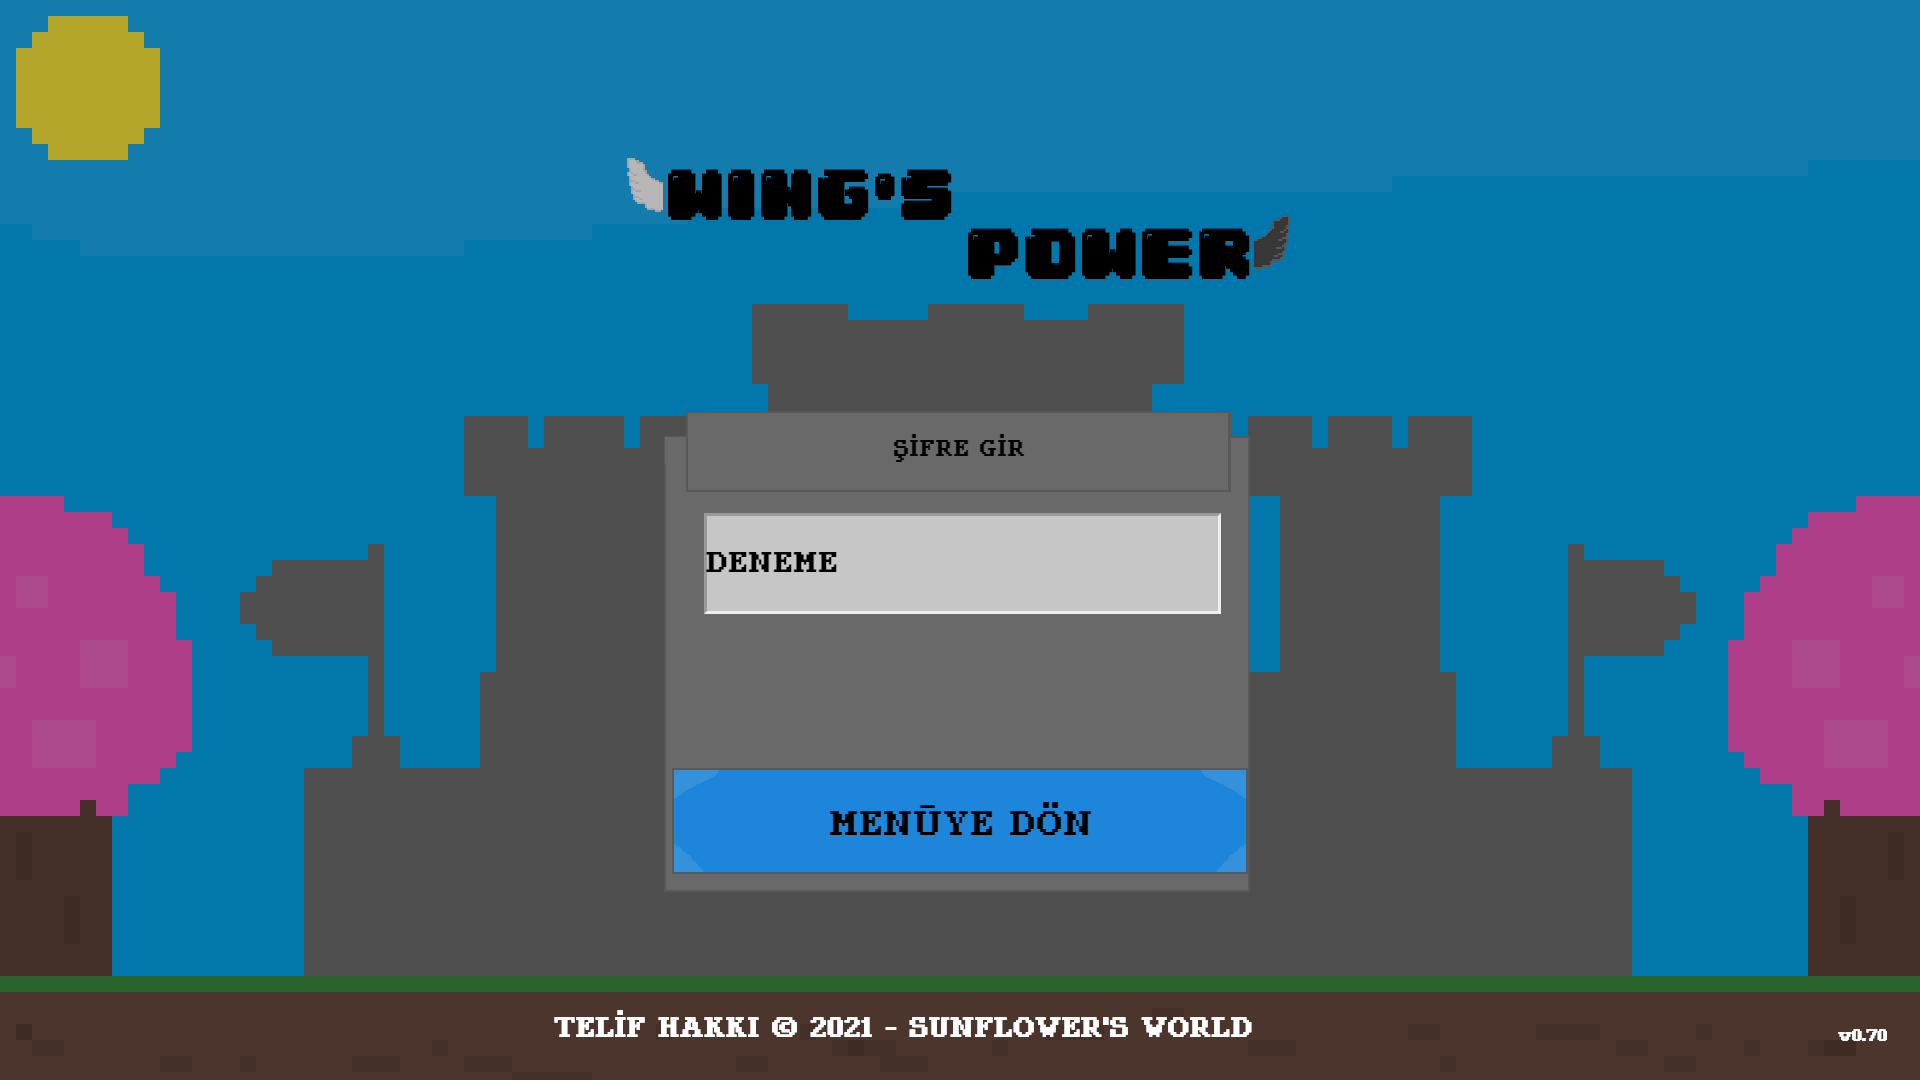 wings-power-password-22.08.2021.png